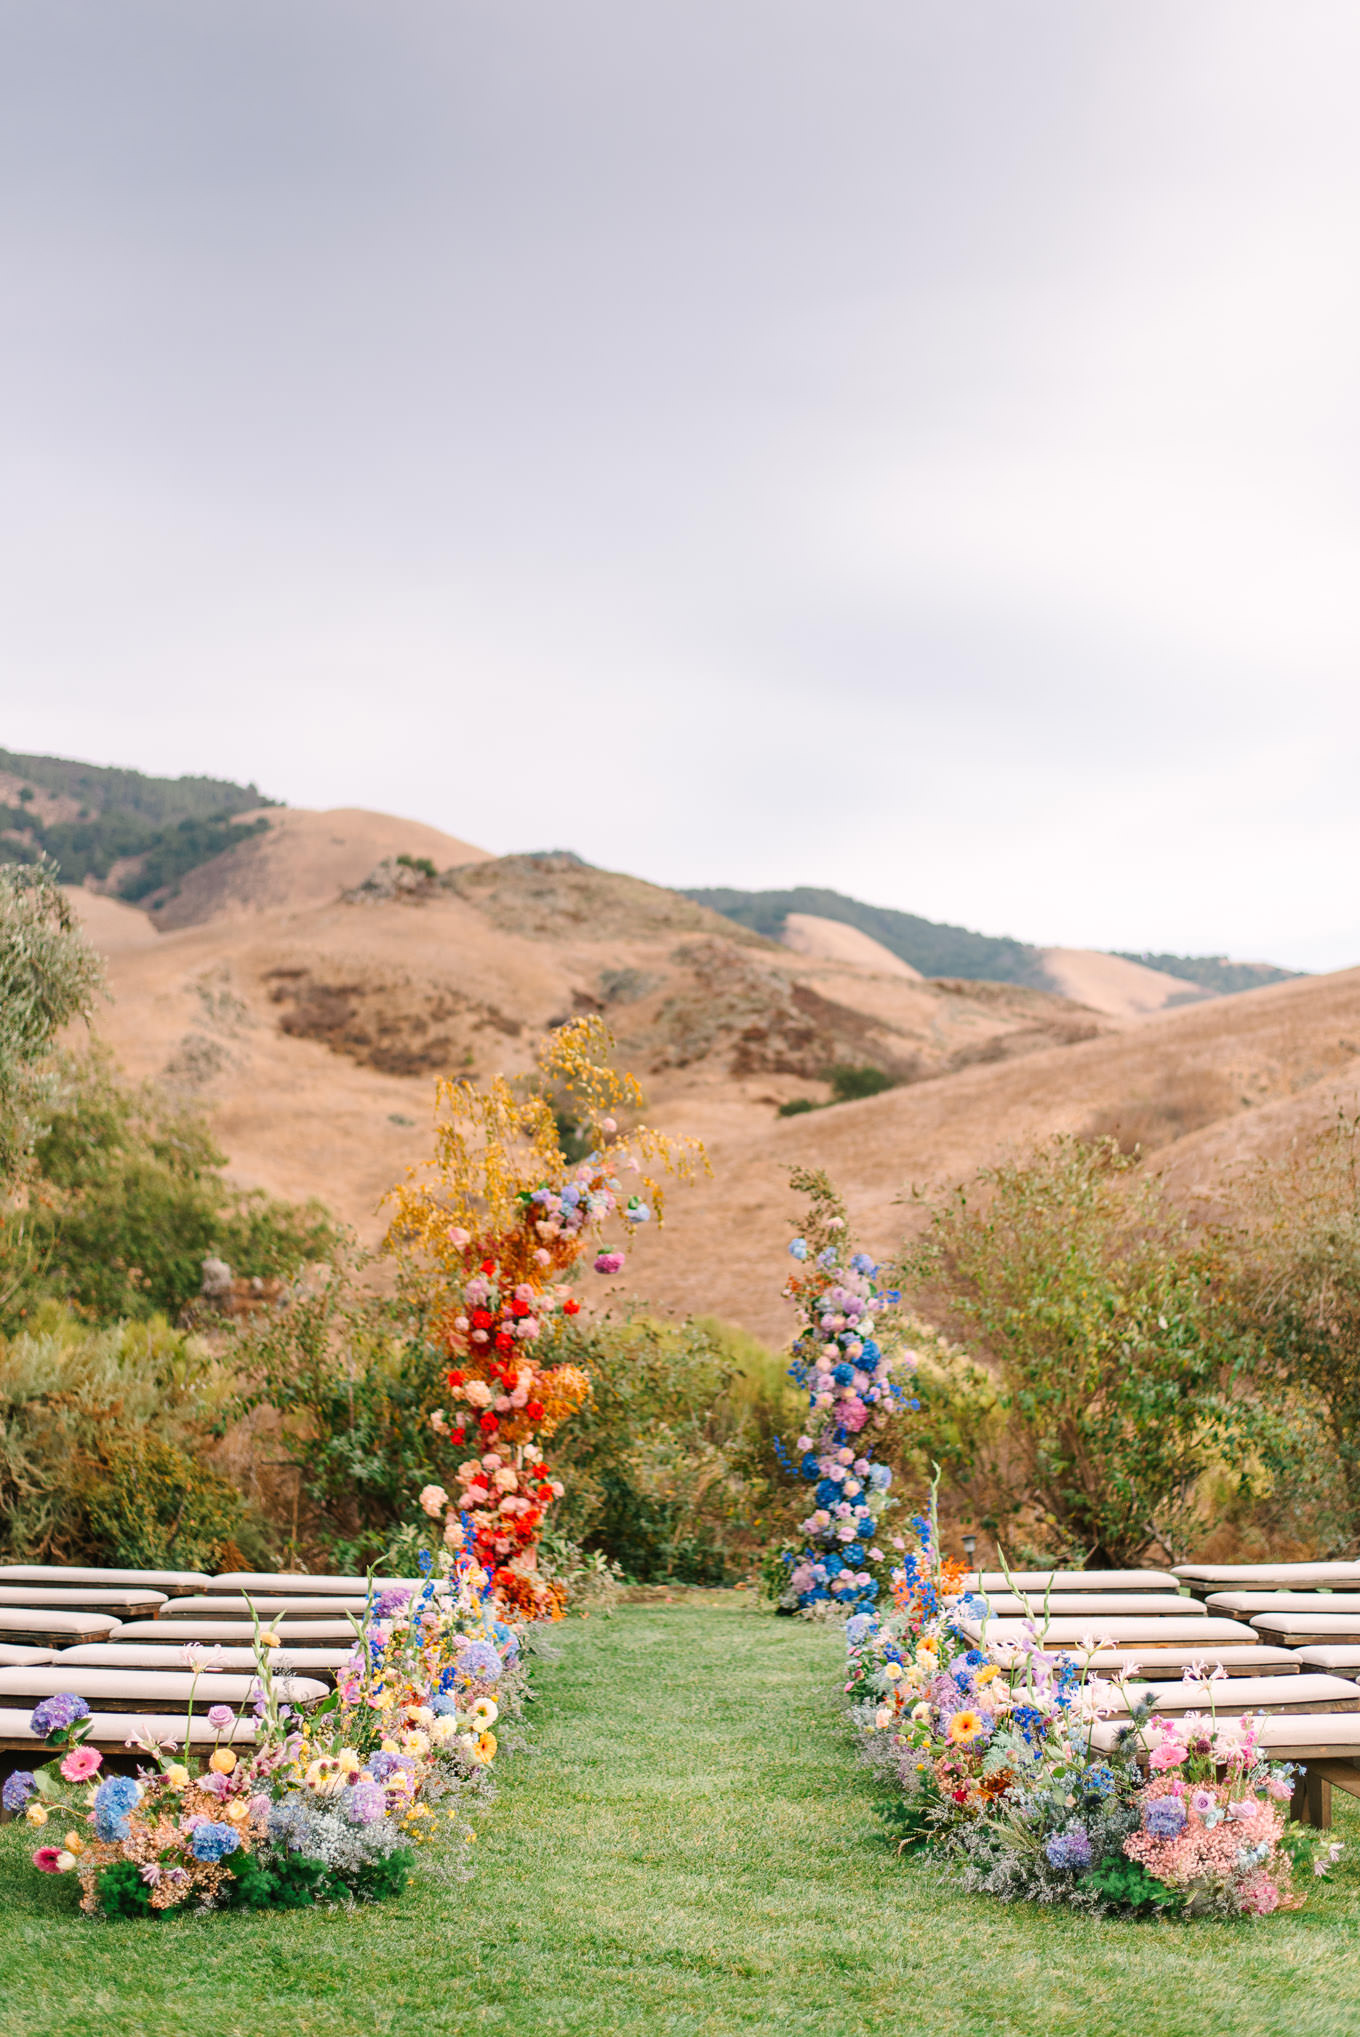 Floral filled wedding ceremony | Colorful and quirky wedding at Higuera Ranch in San Luis Obispo | #sanluisobispowedding #californiawedding #higueraranch #madonnainn   Source: Mary Costa Photography | Los Angeles